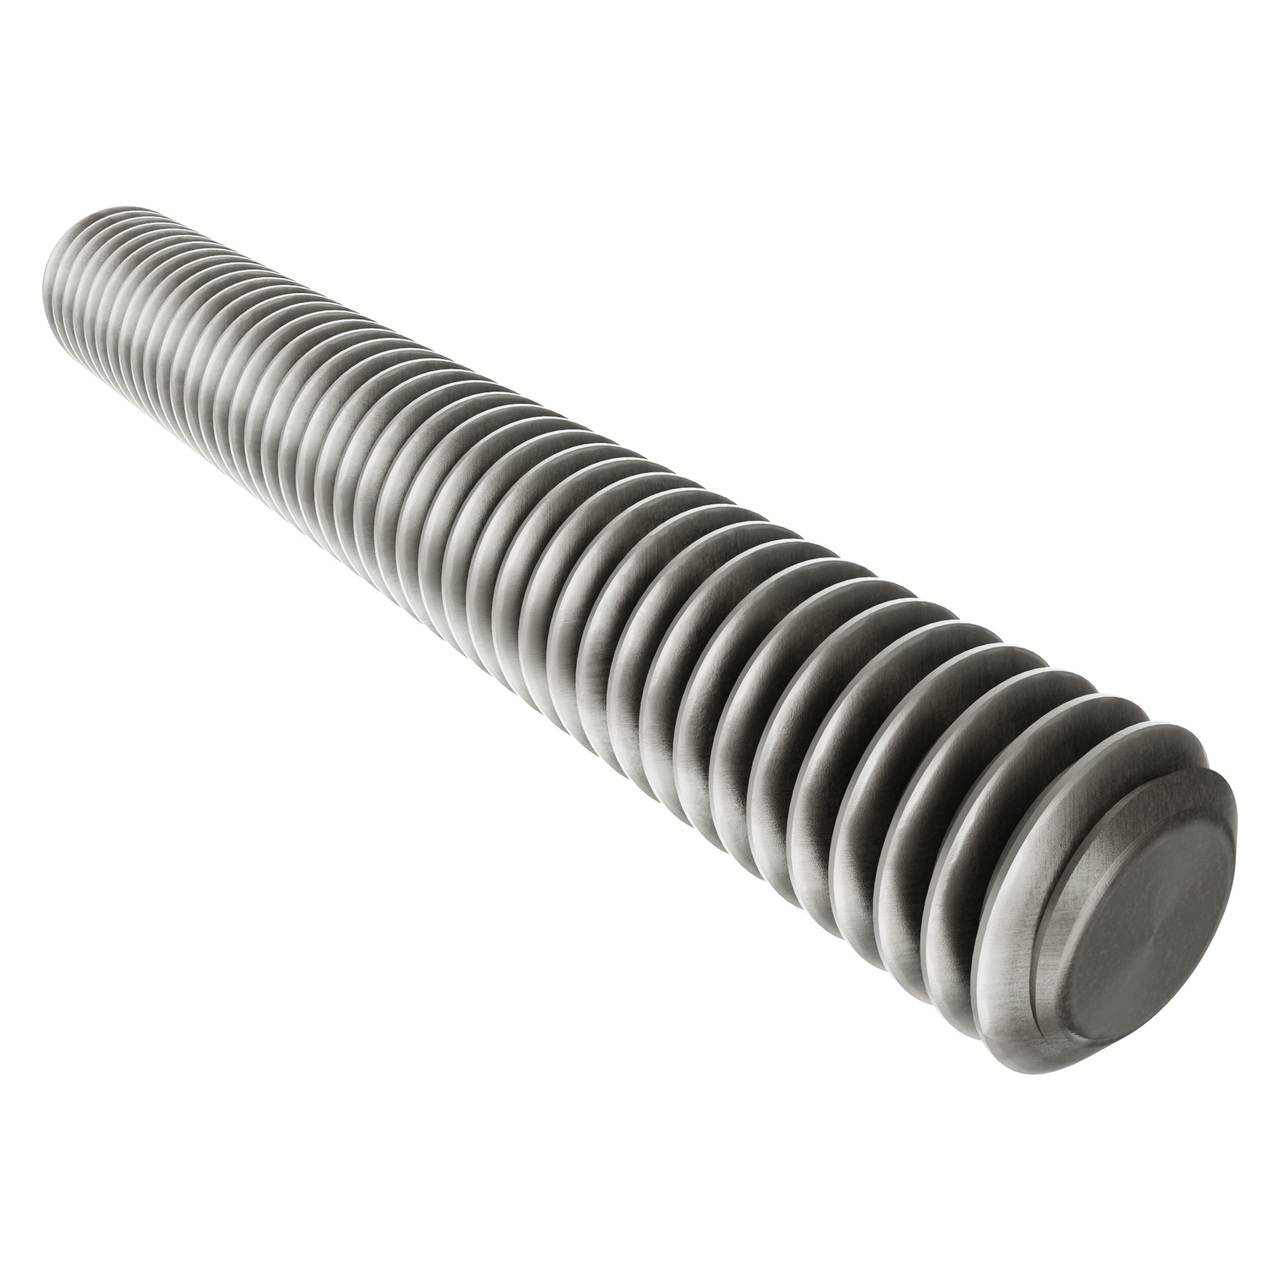 2808 Series Stainless Steel Threaded Rod (M4 x 0.7mm, 30mm Length) - 2 Pack